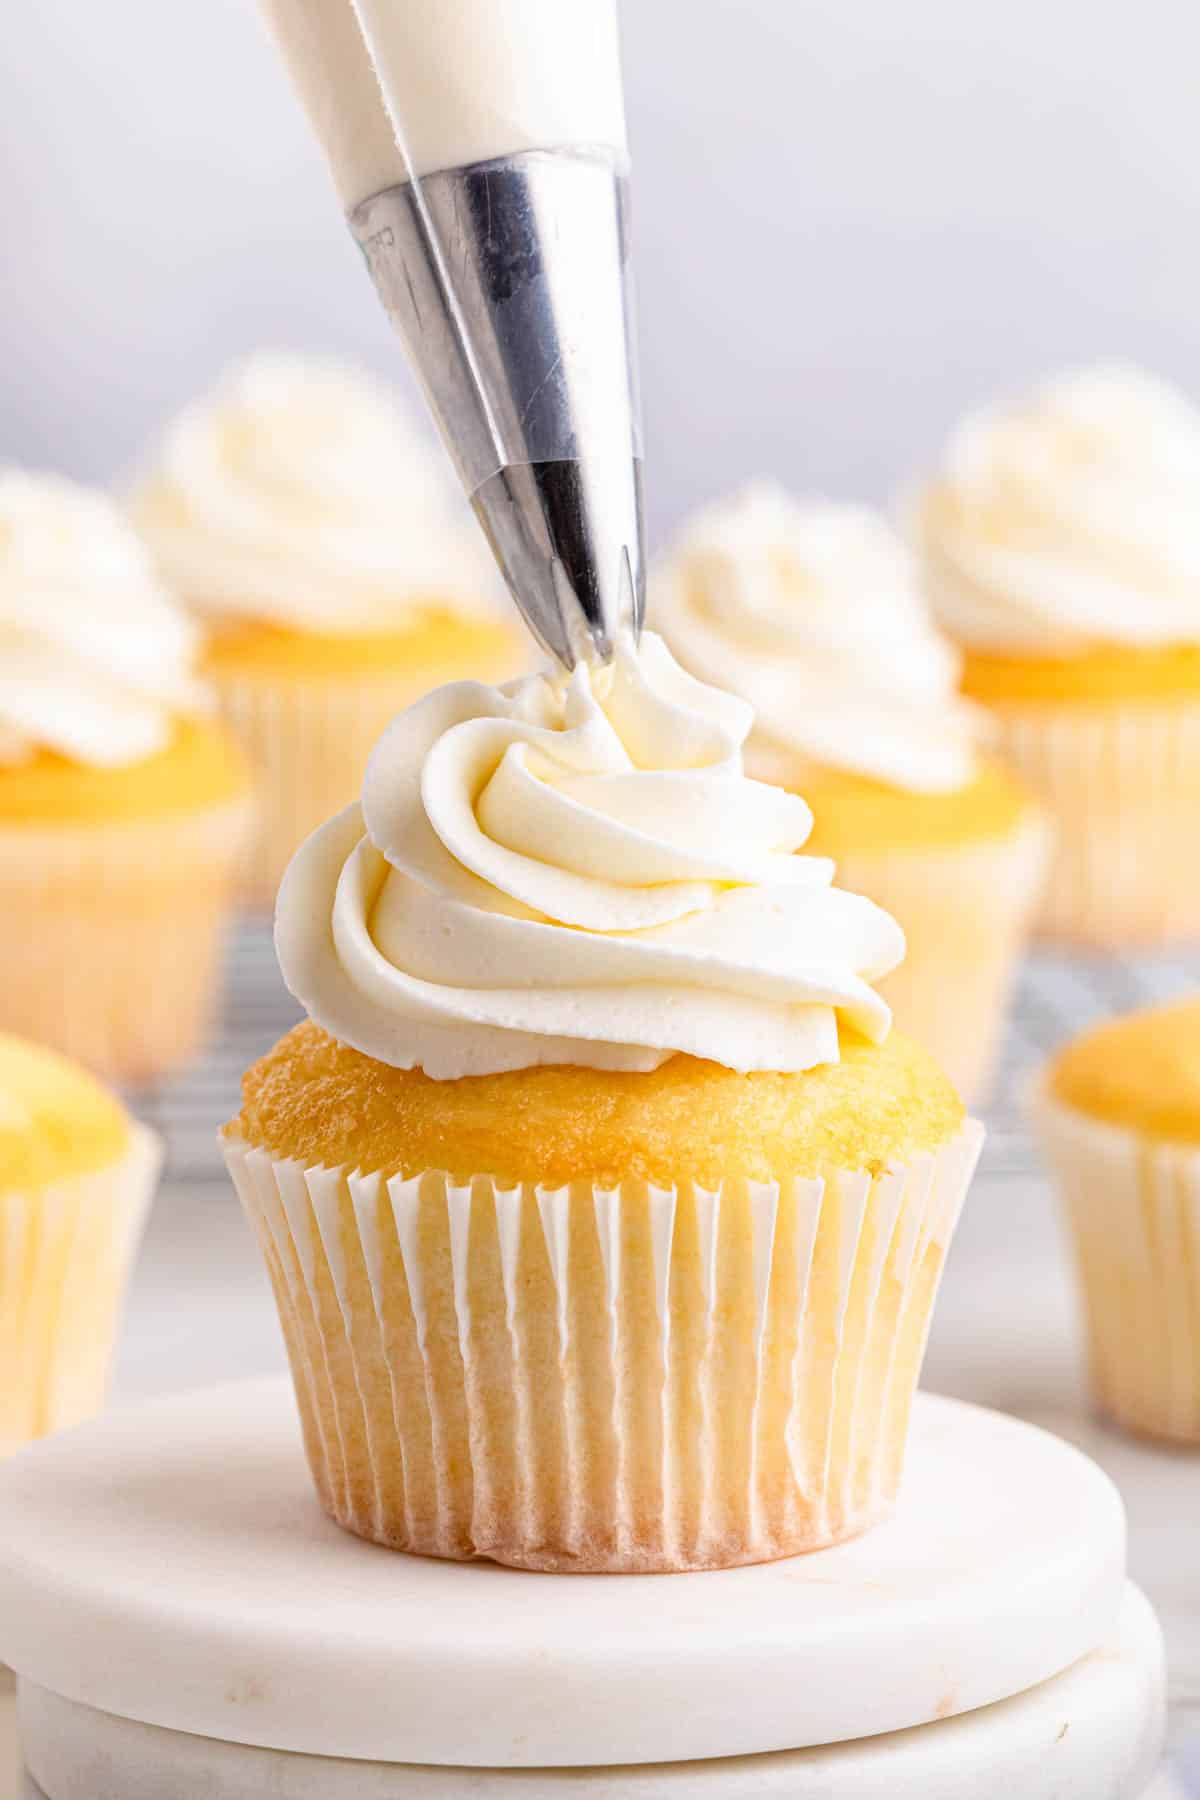 Whipped cream being piped onto a cupcake.